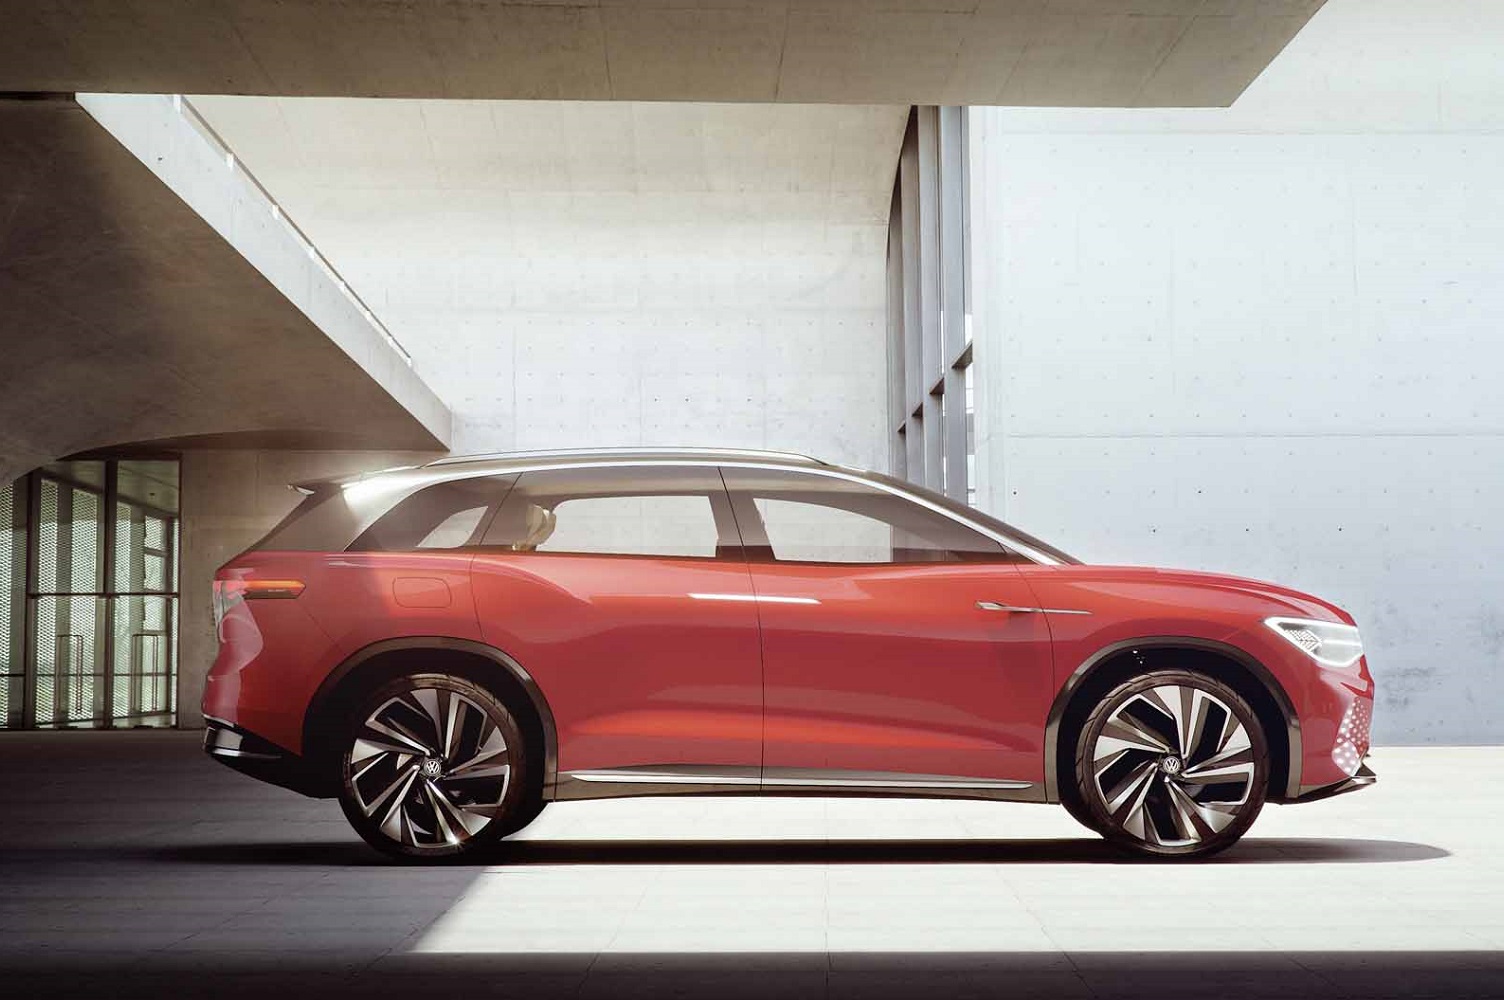 volkswagen id roomzz previews production suv coming in 2021 vw concept 3